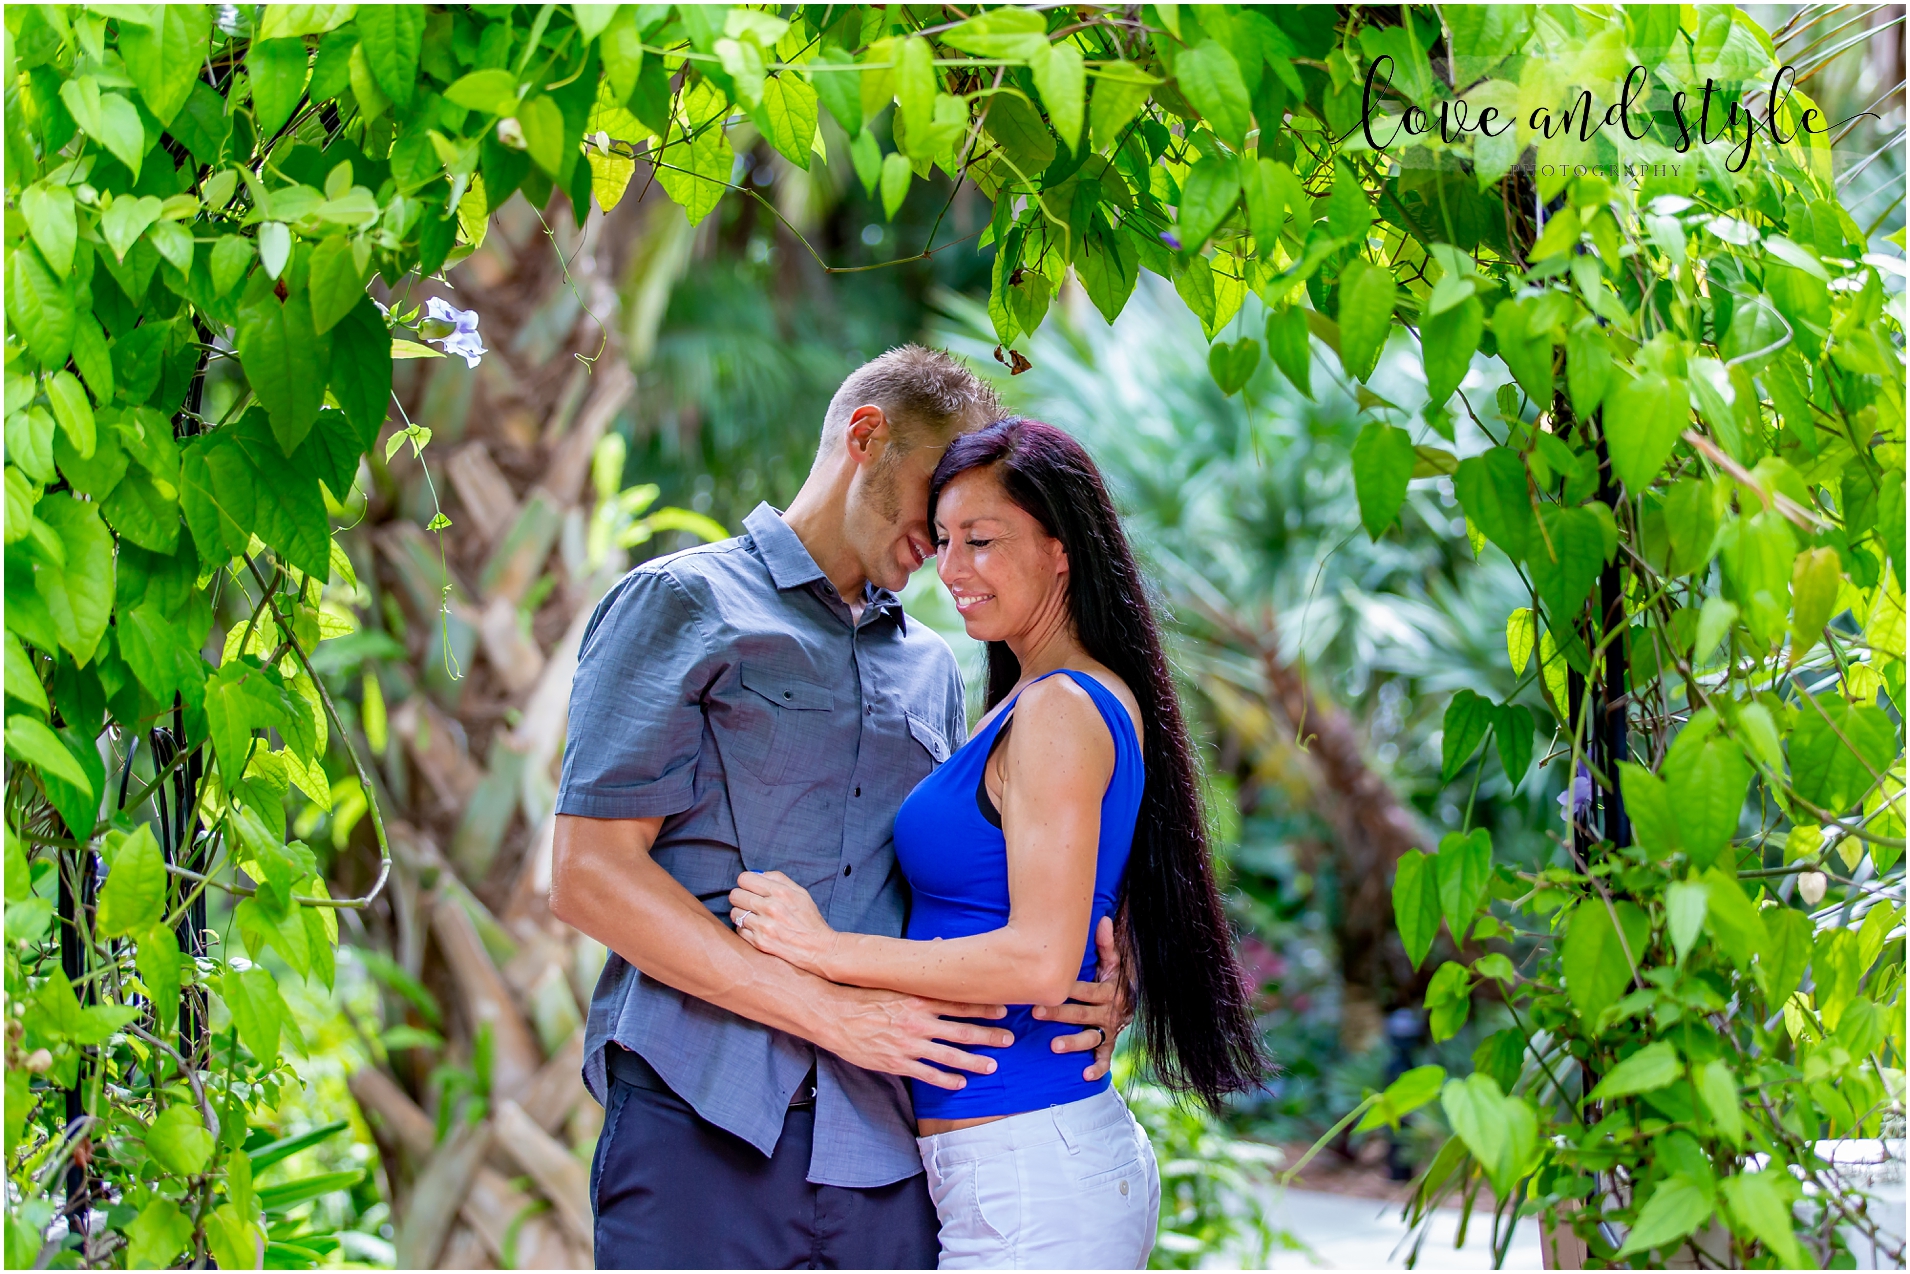 Selby Garden Engagement Photography in Sarasota, FL